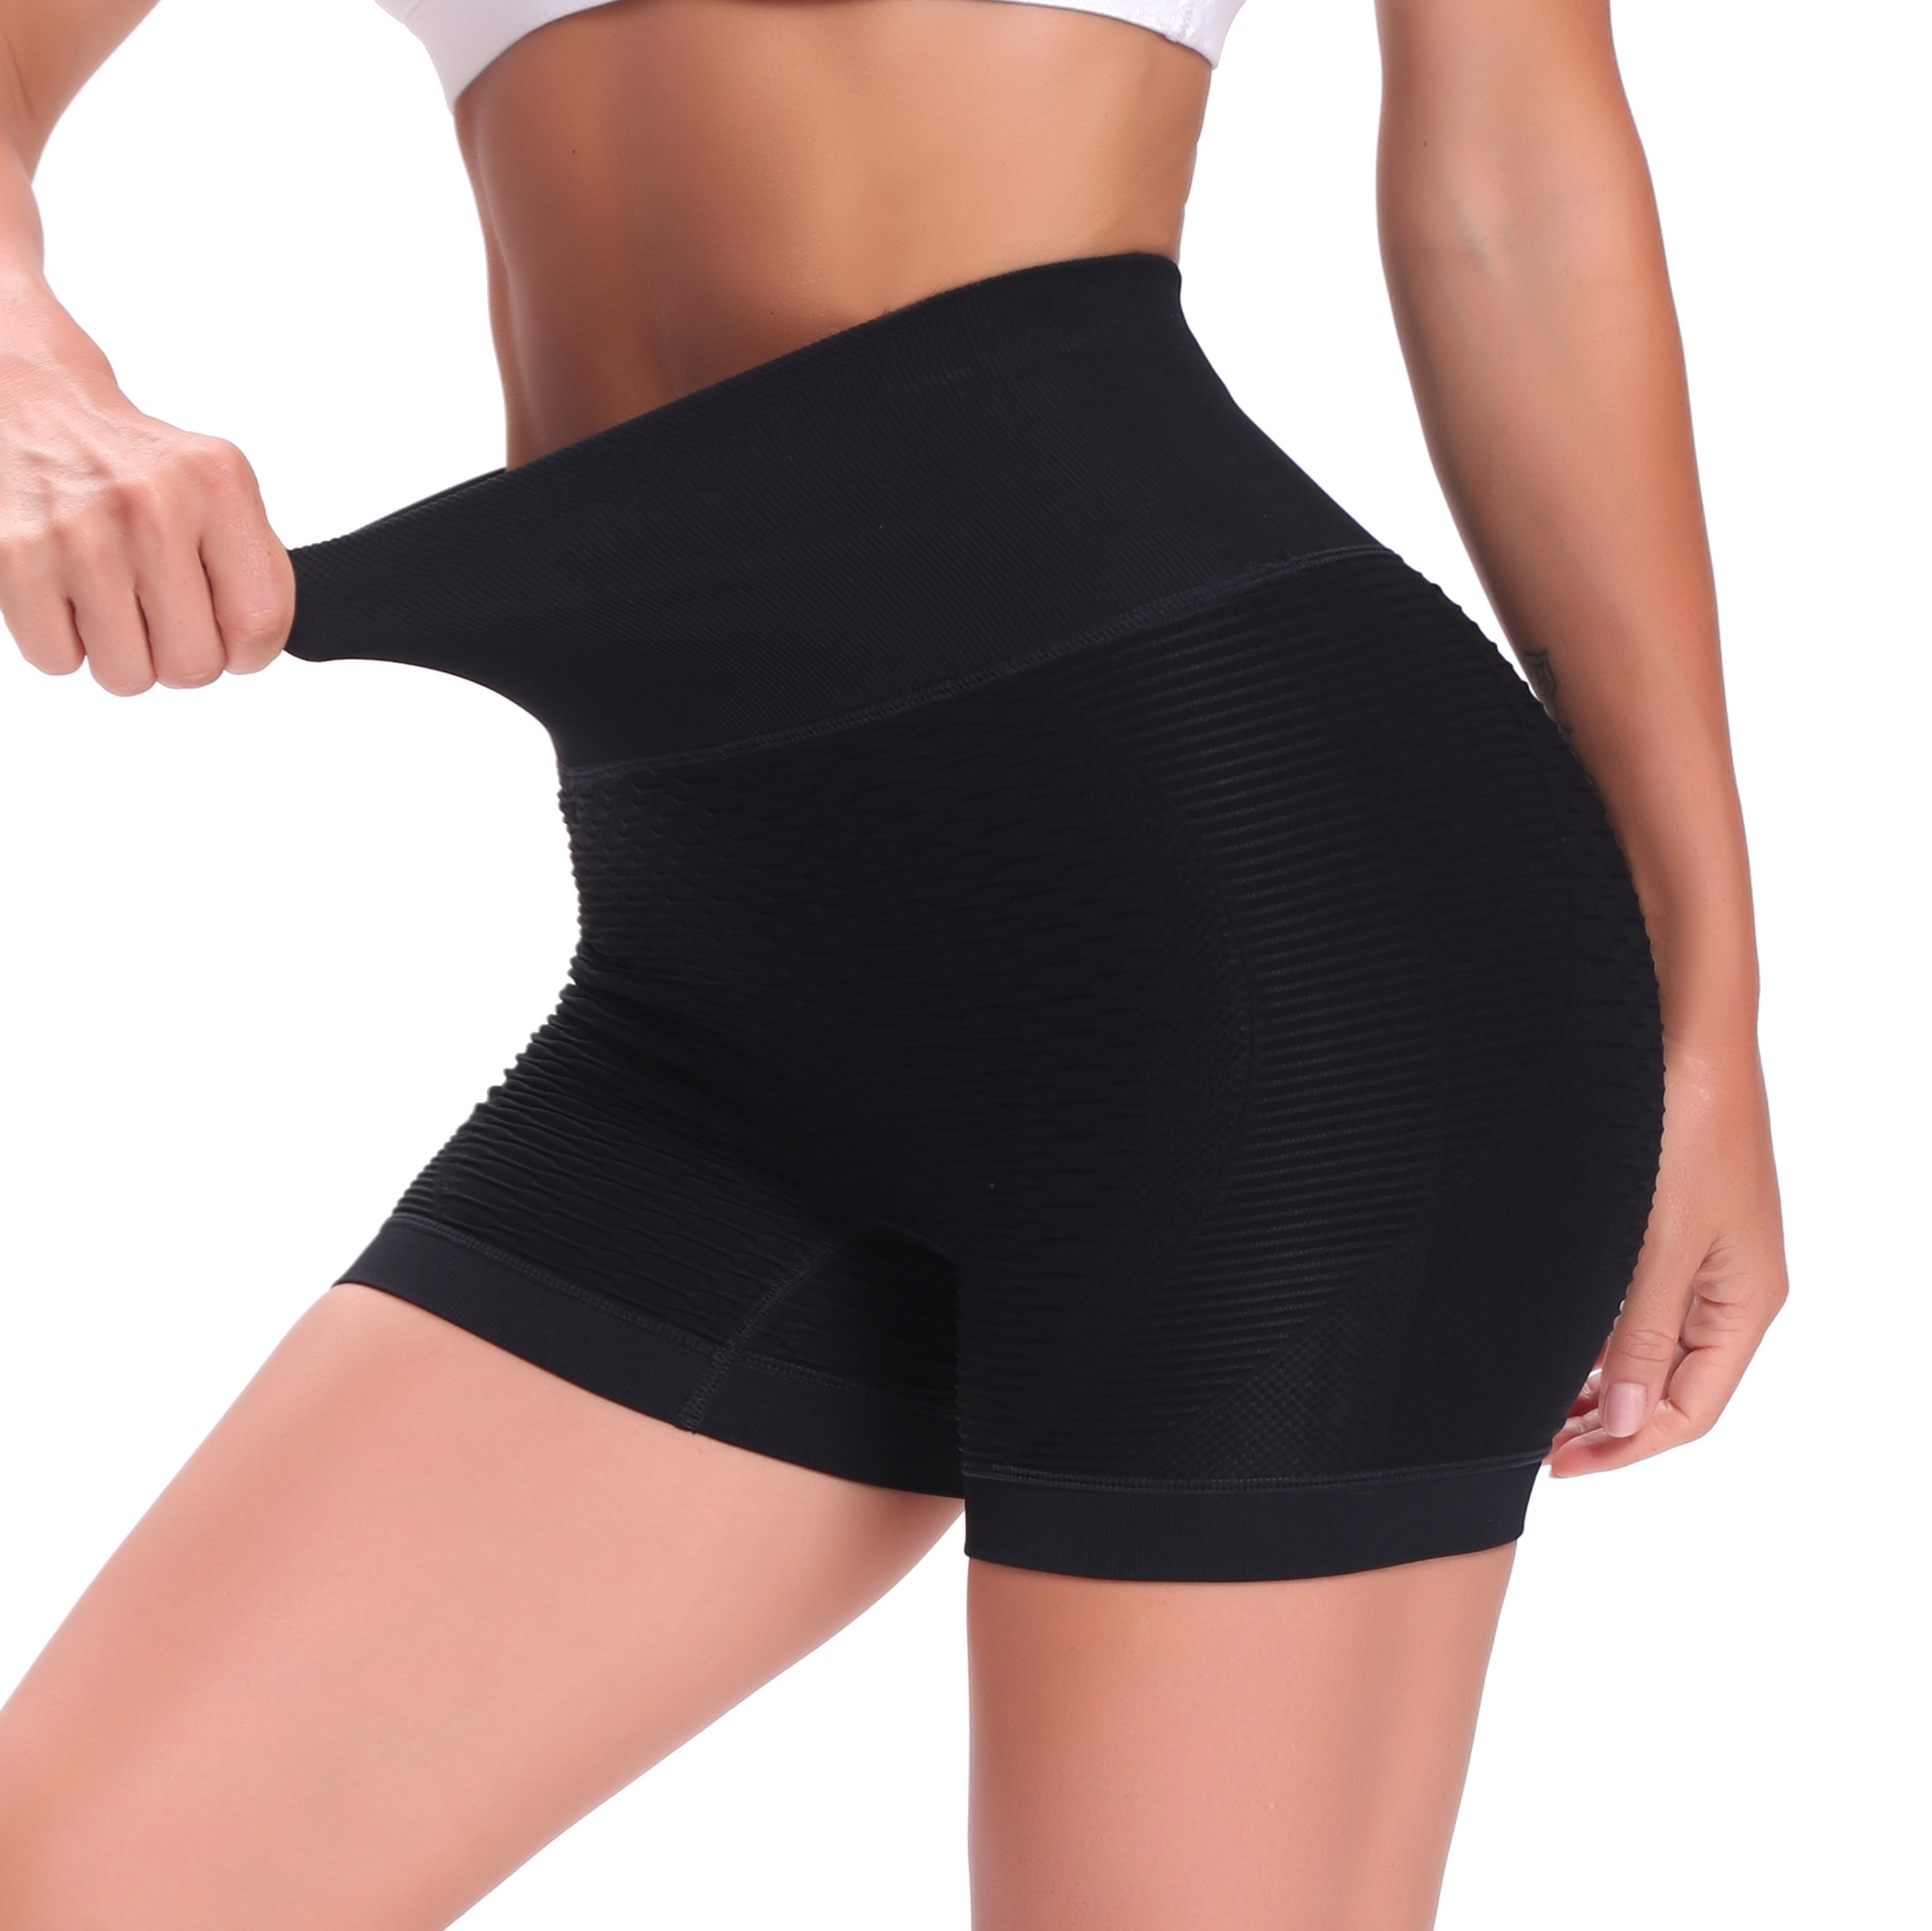 Slim Fit Seamless Sports Fitness Yoga Shorts Manufacturer